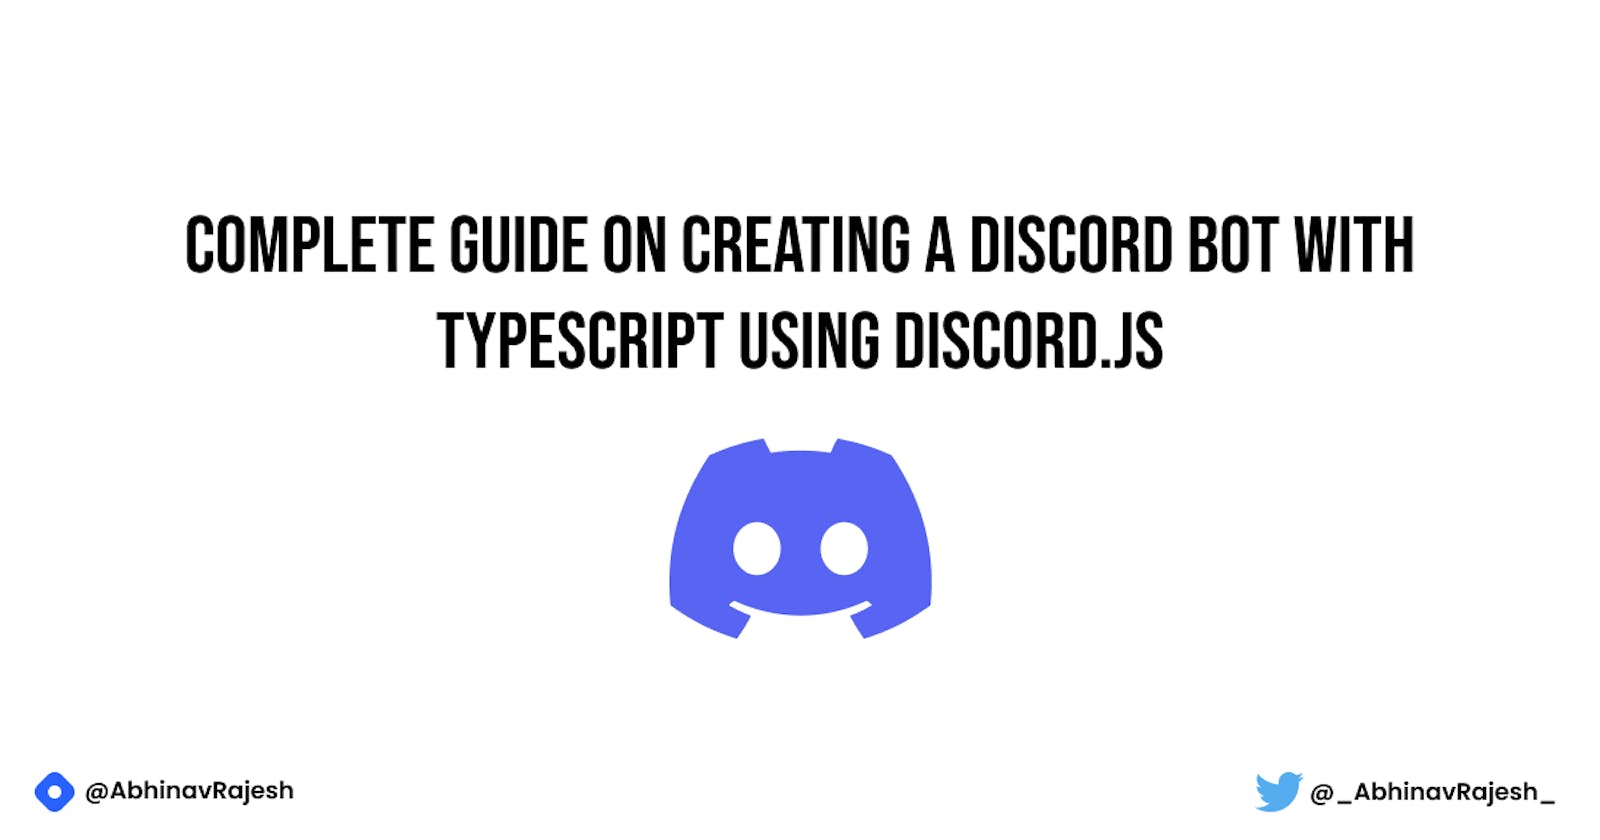 Part 1: Complete guide on creating a Discord bot with TypeScript using discord.js